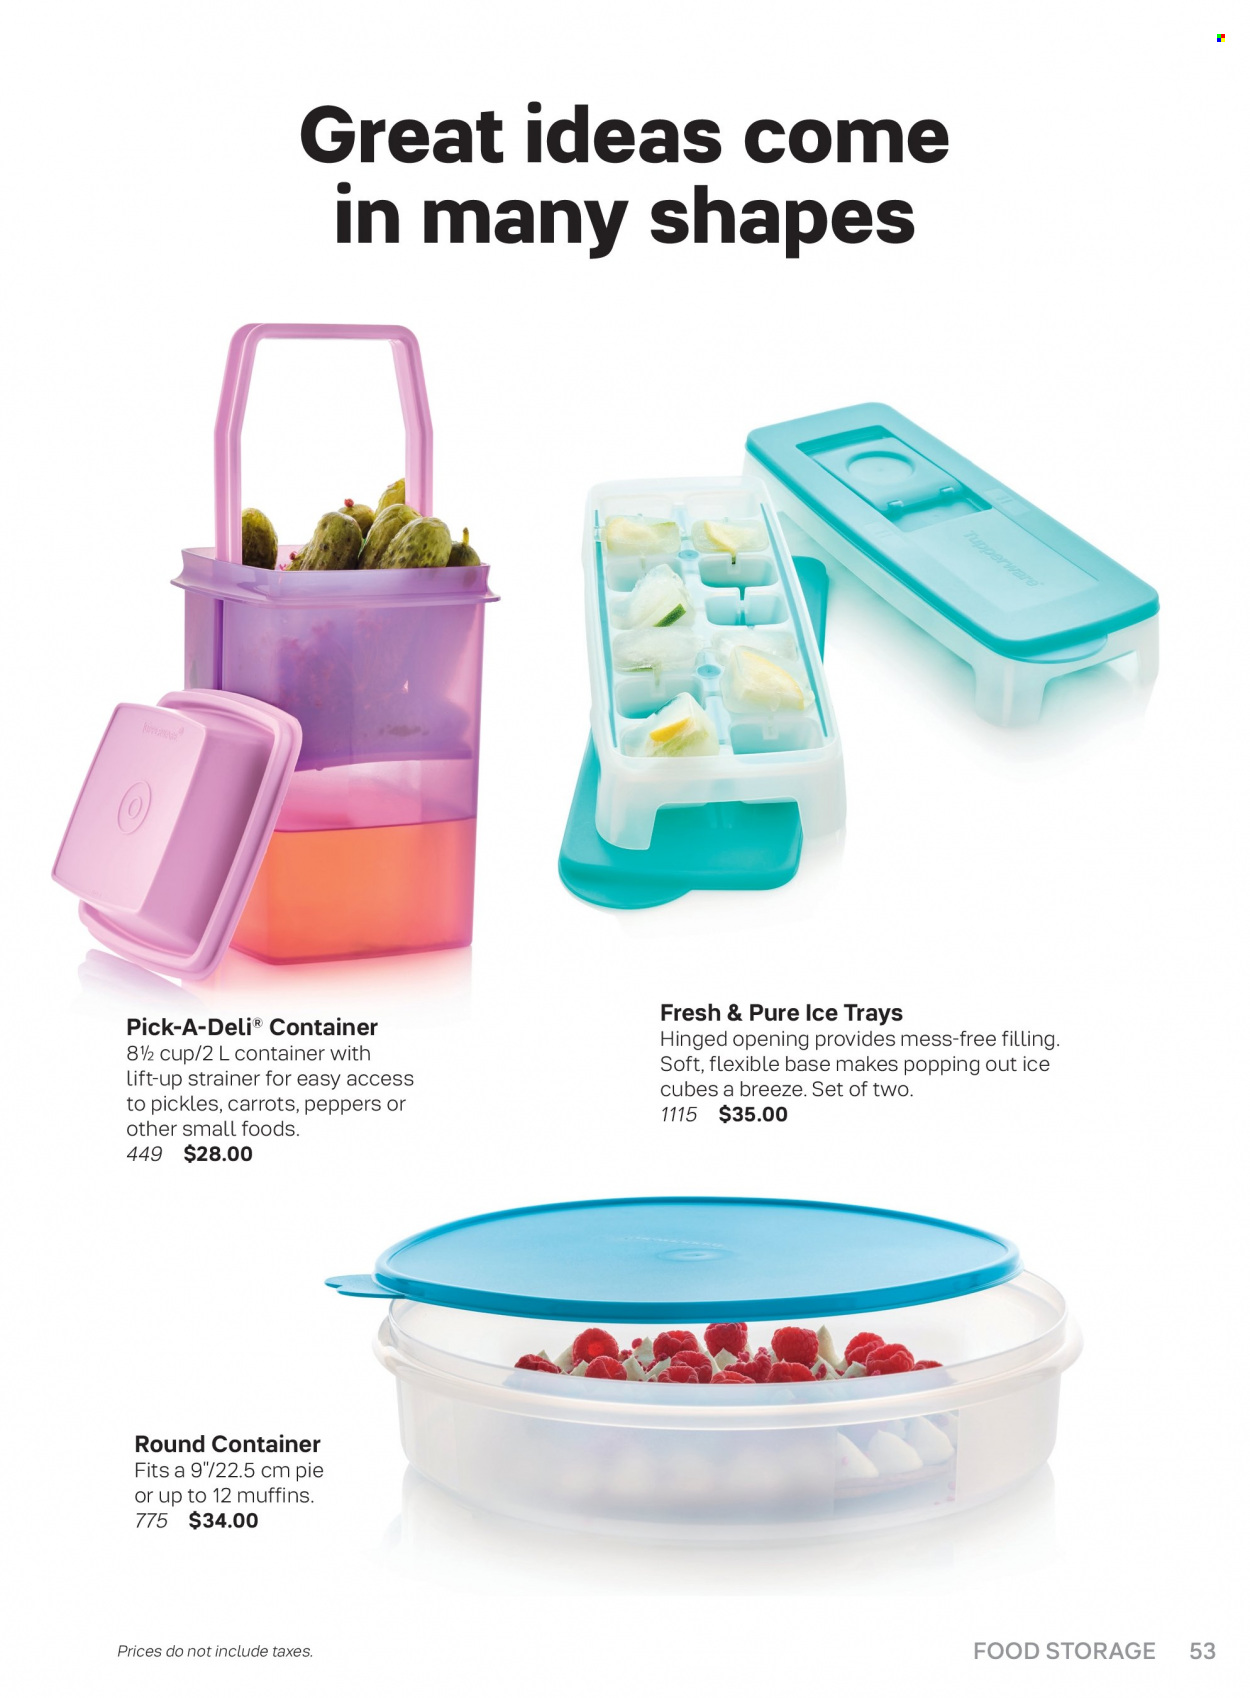 Circulaire Tupperware . Page 53.